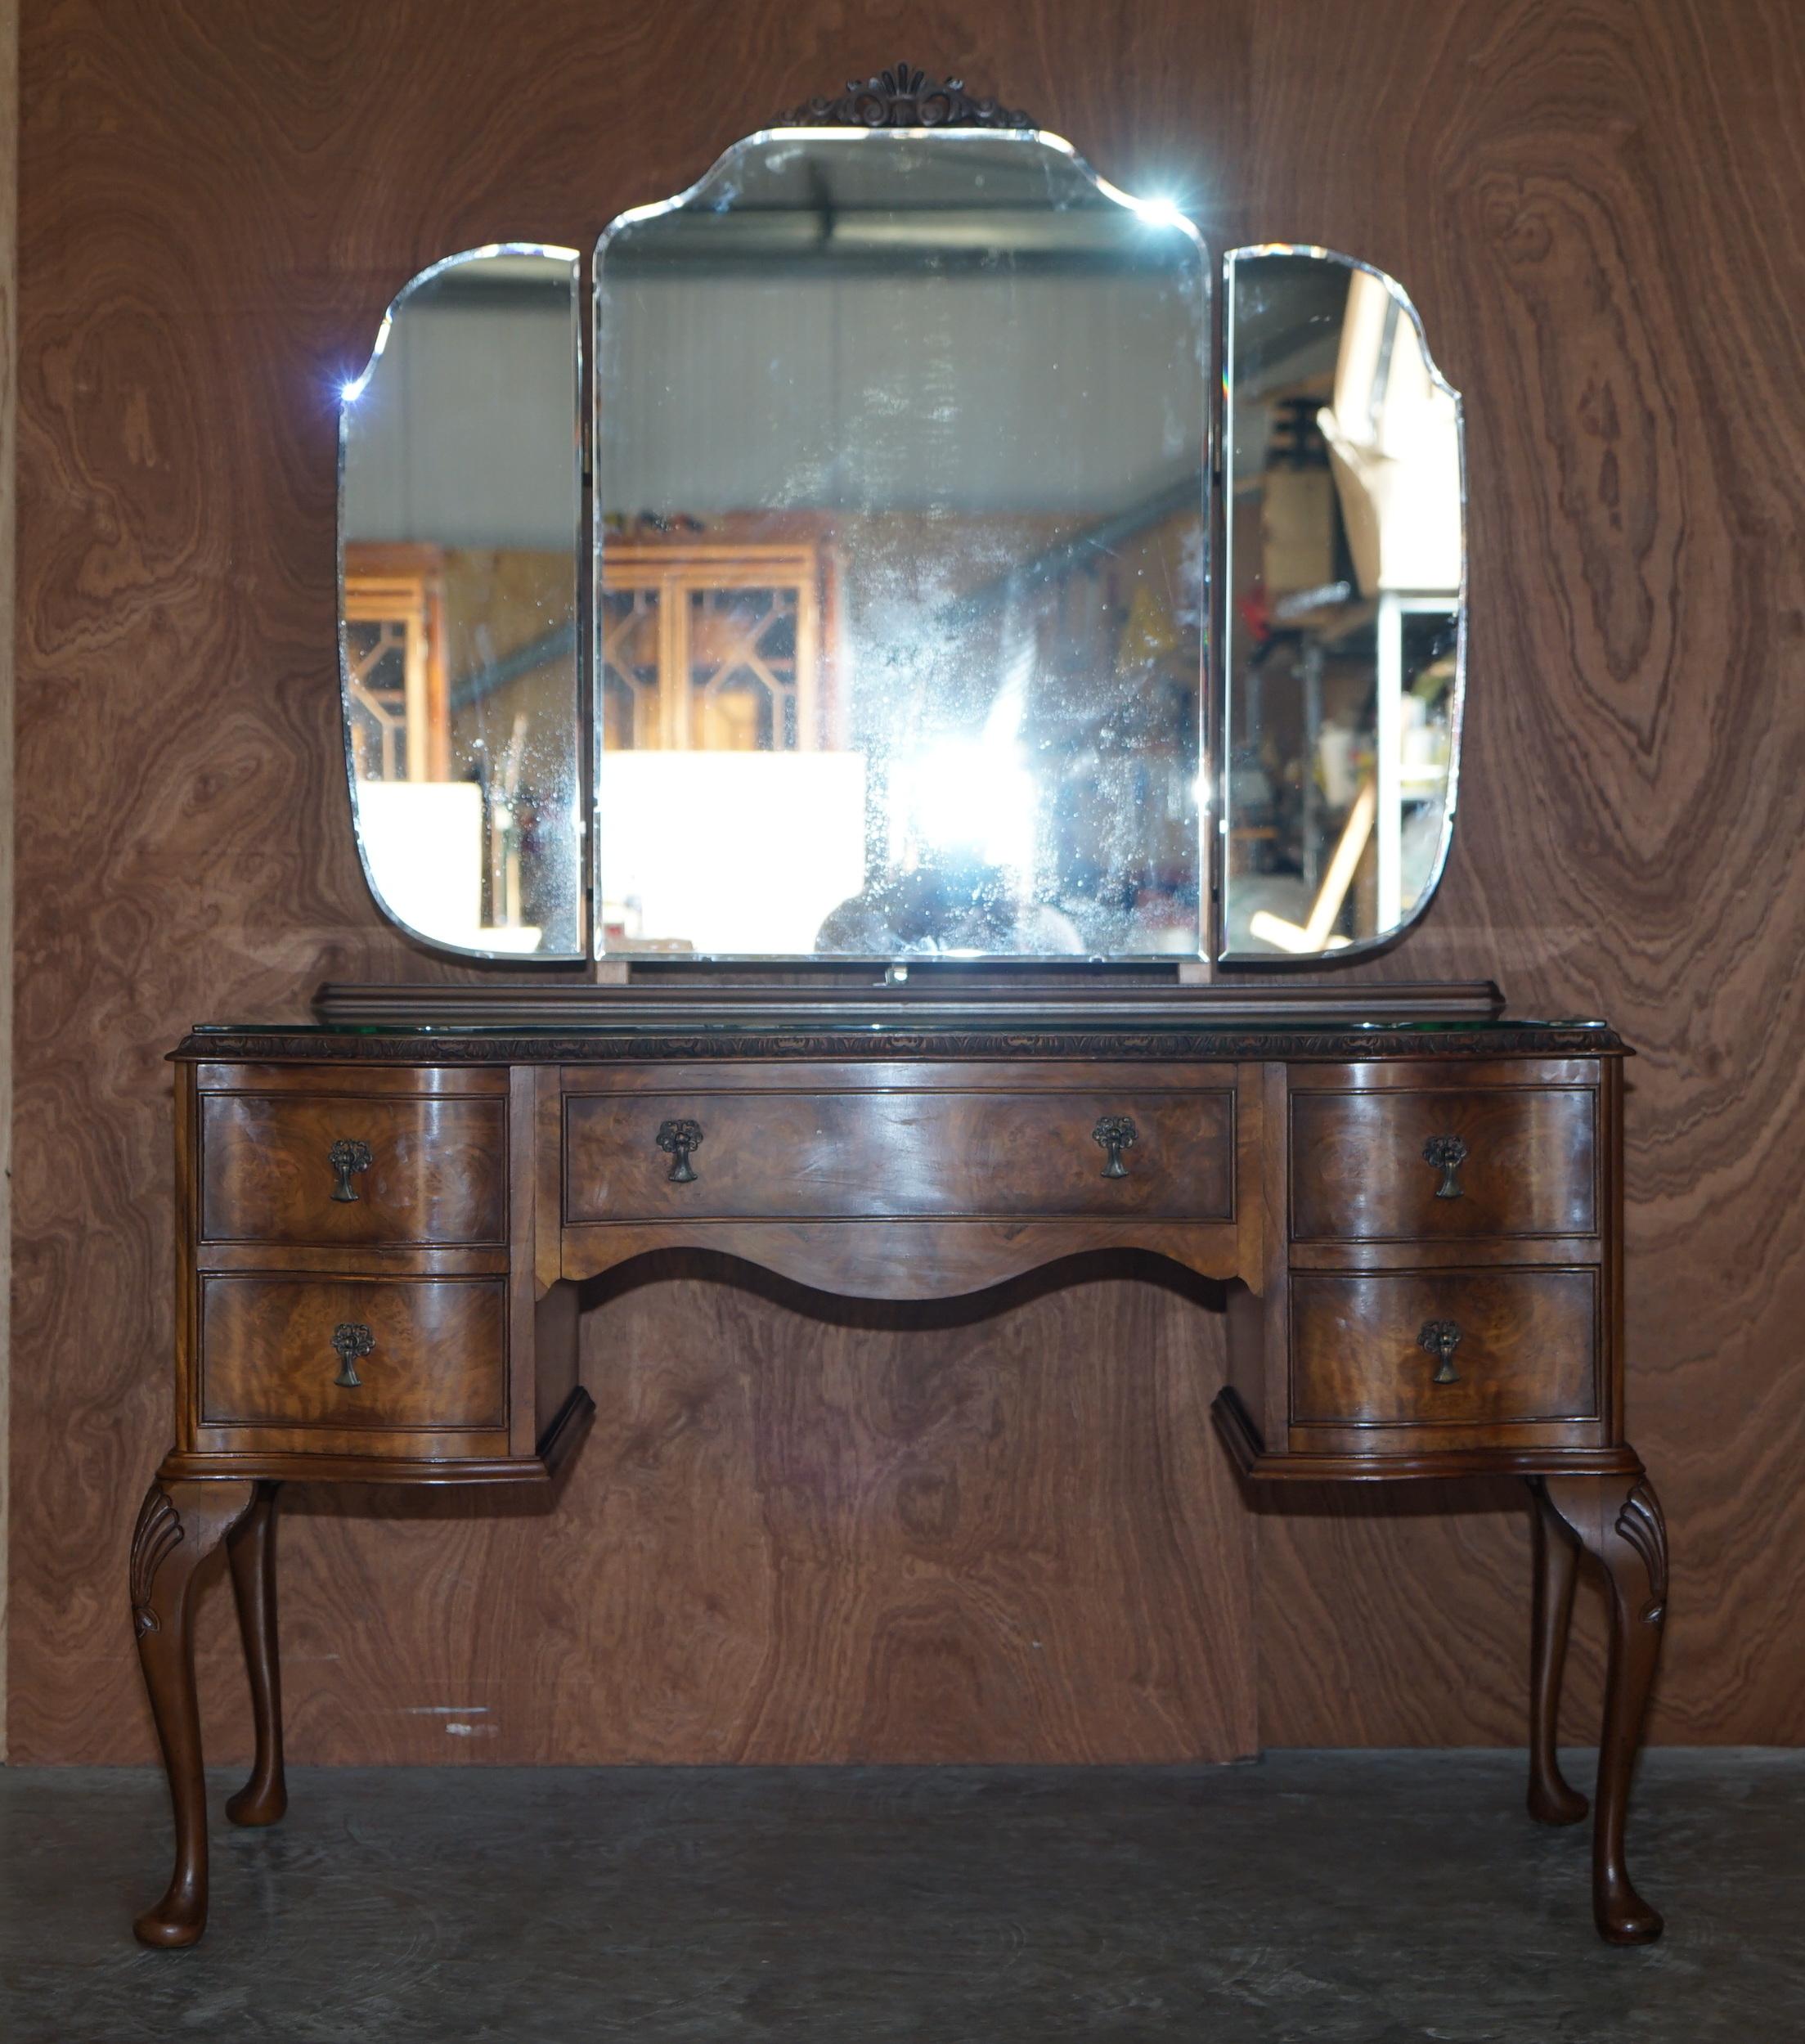 We are delighted to offer for sale this lovely circa 1930’s large Burr Walnut dressing table with tri folding mirrors.

This dressing table is in good period condition, it offers lots of internal storage space, the mirrors are tri fold so you can